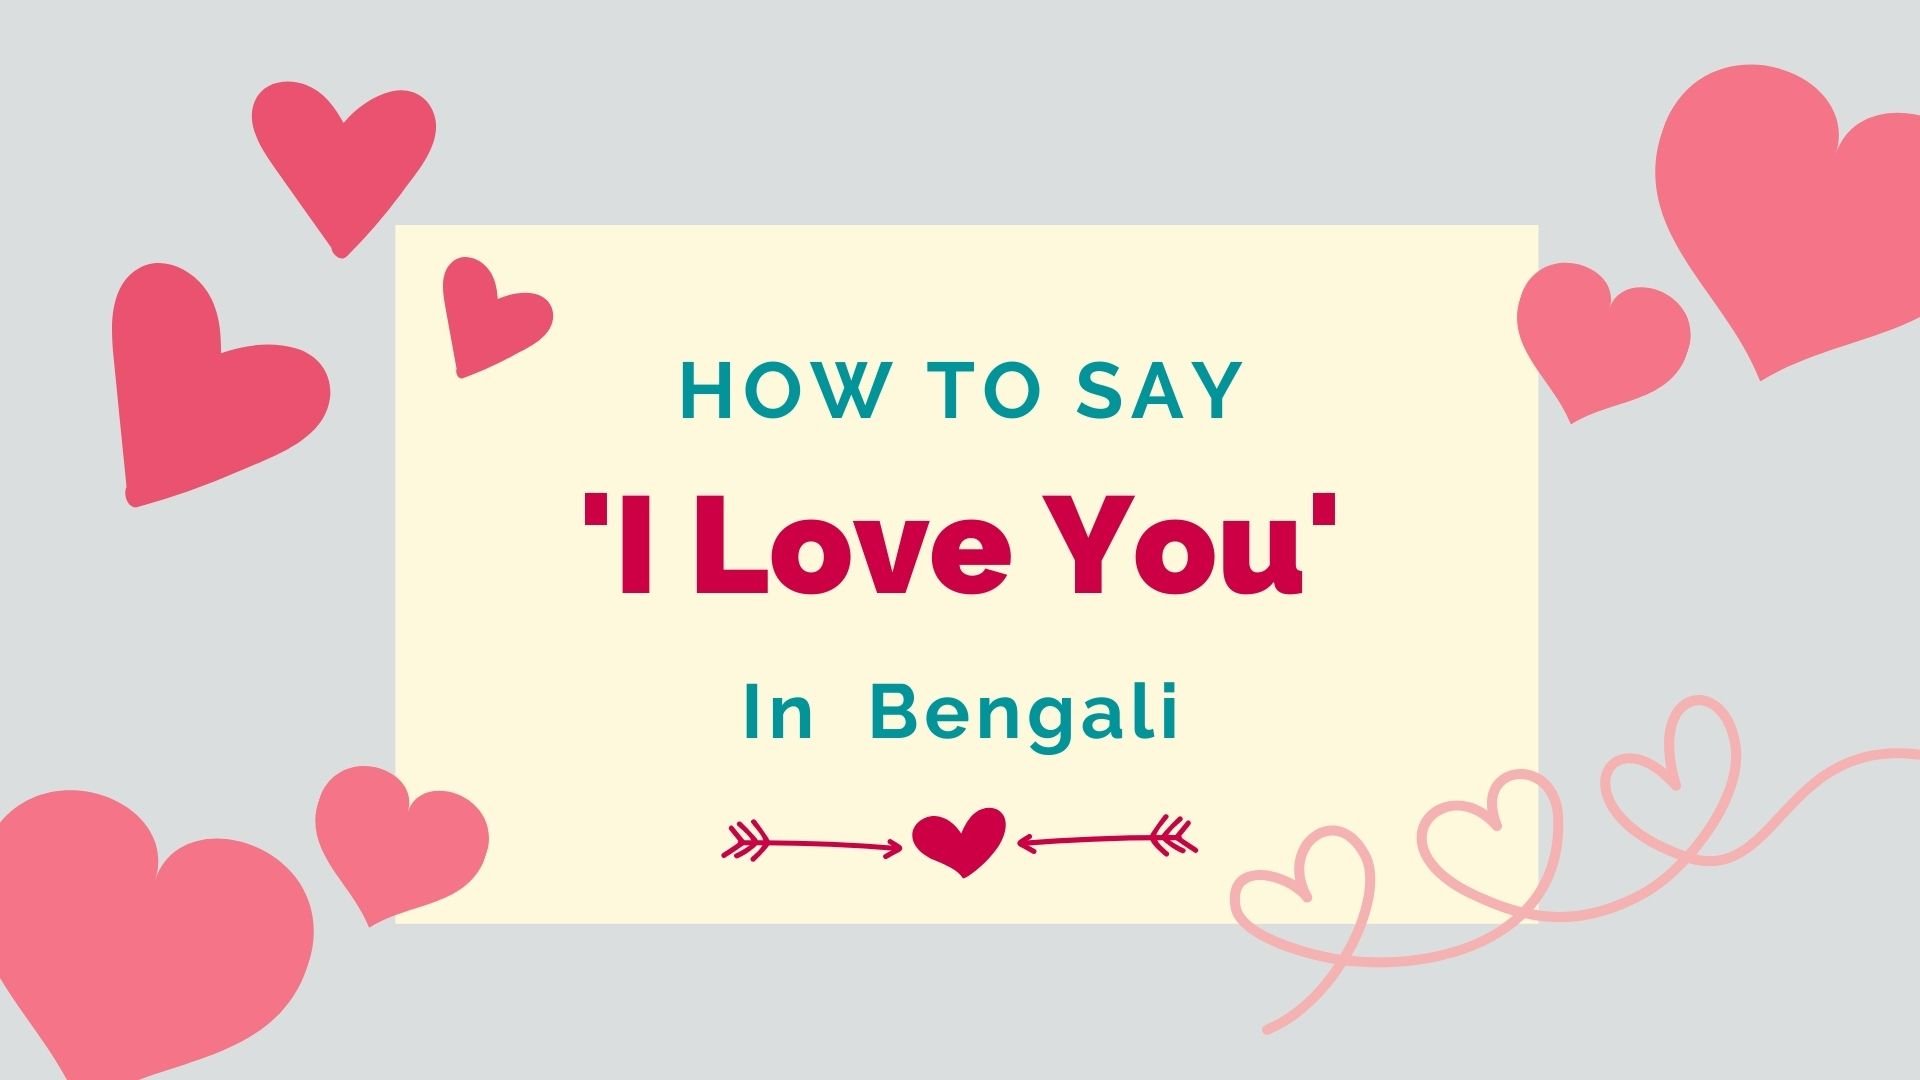 How To Say 'I Love You' In Bengali + Other Romantic Phrases - Lingalot